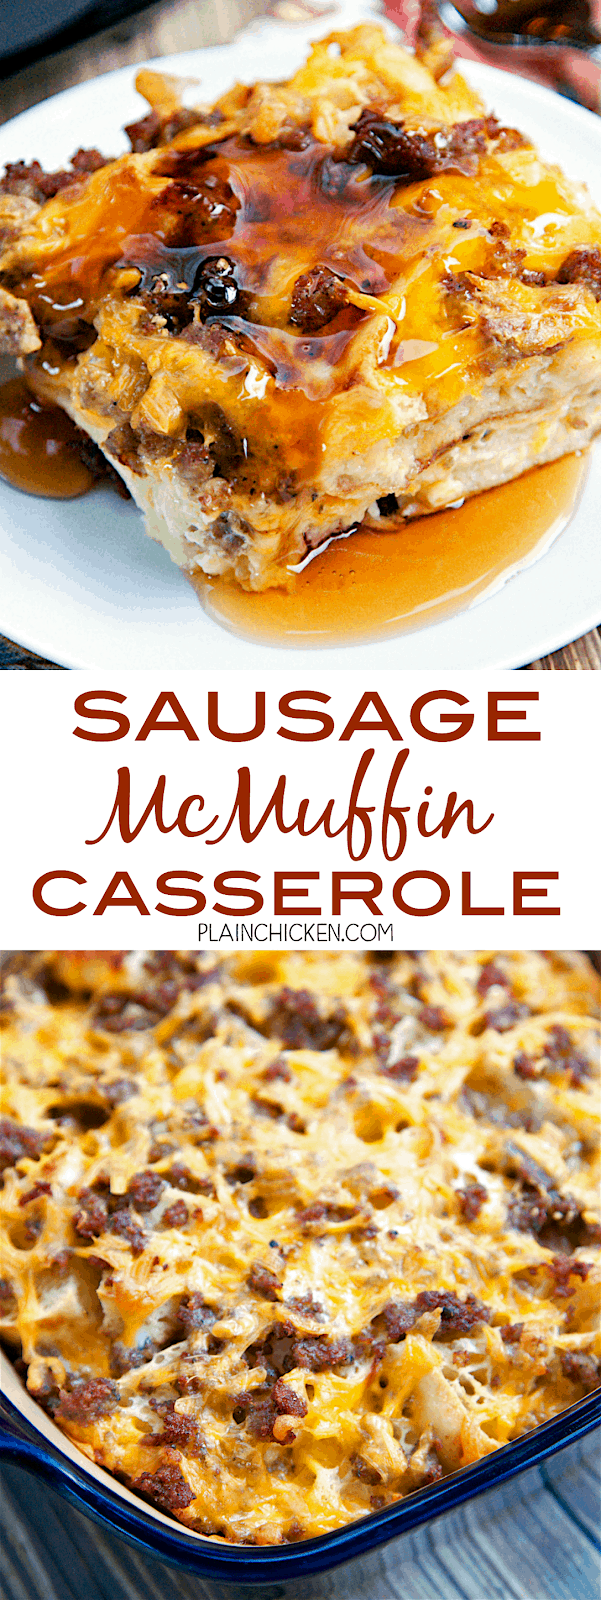 Sausage McMuffin Casserole - Chopped English muffins, sausage, cheese, eggs and milk. Can make a day ahead of time and bake for breakfast, lunch or dinner. All the flavors of a Sausage McMuffin from Mc Donald's in a yummy breakfast casserole. Serve with maple syrup!